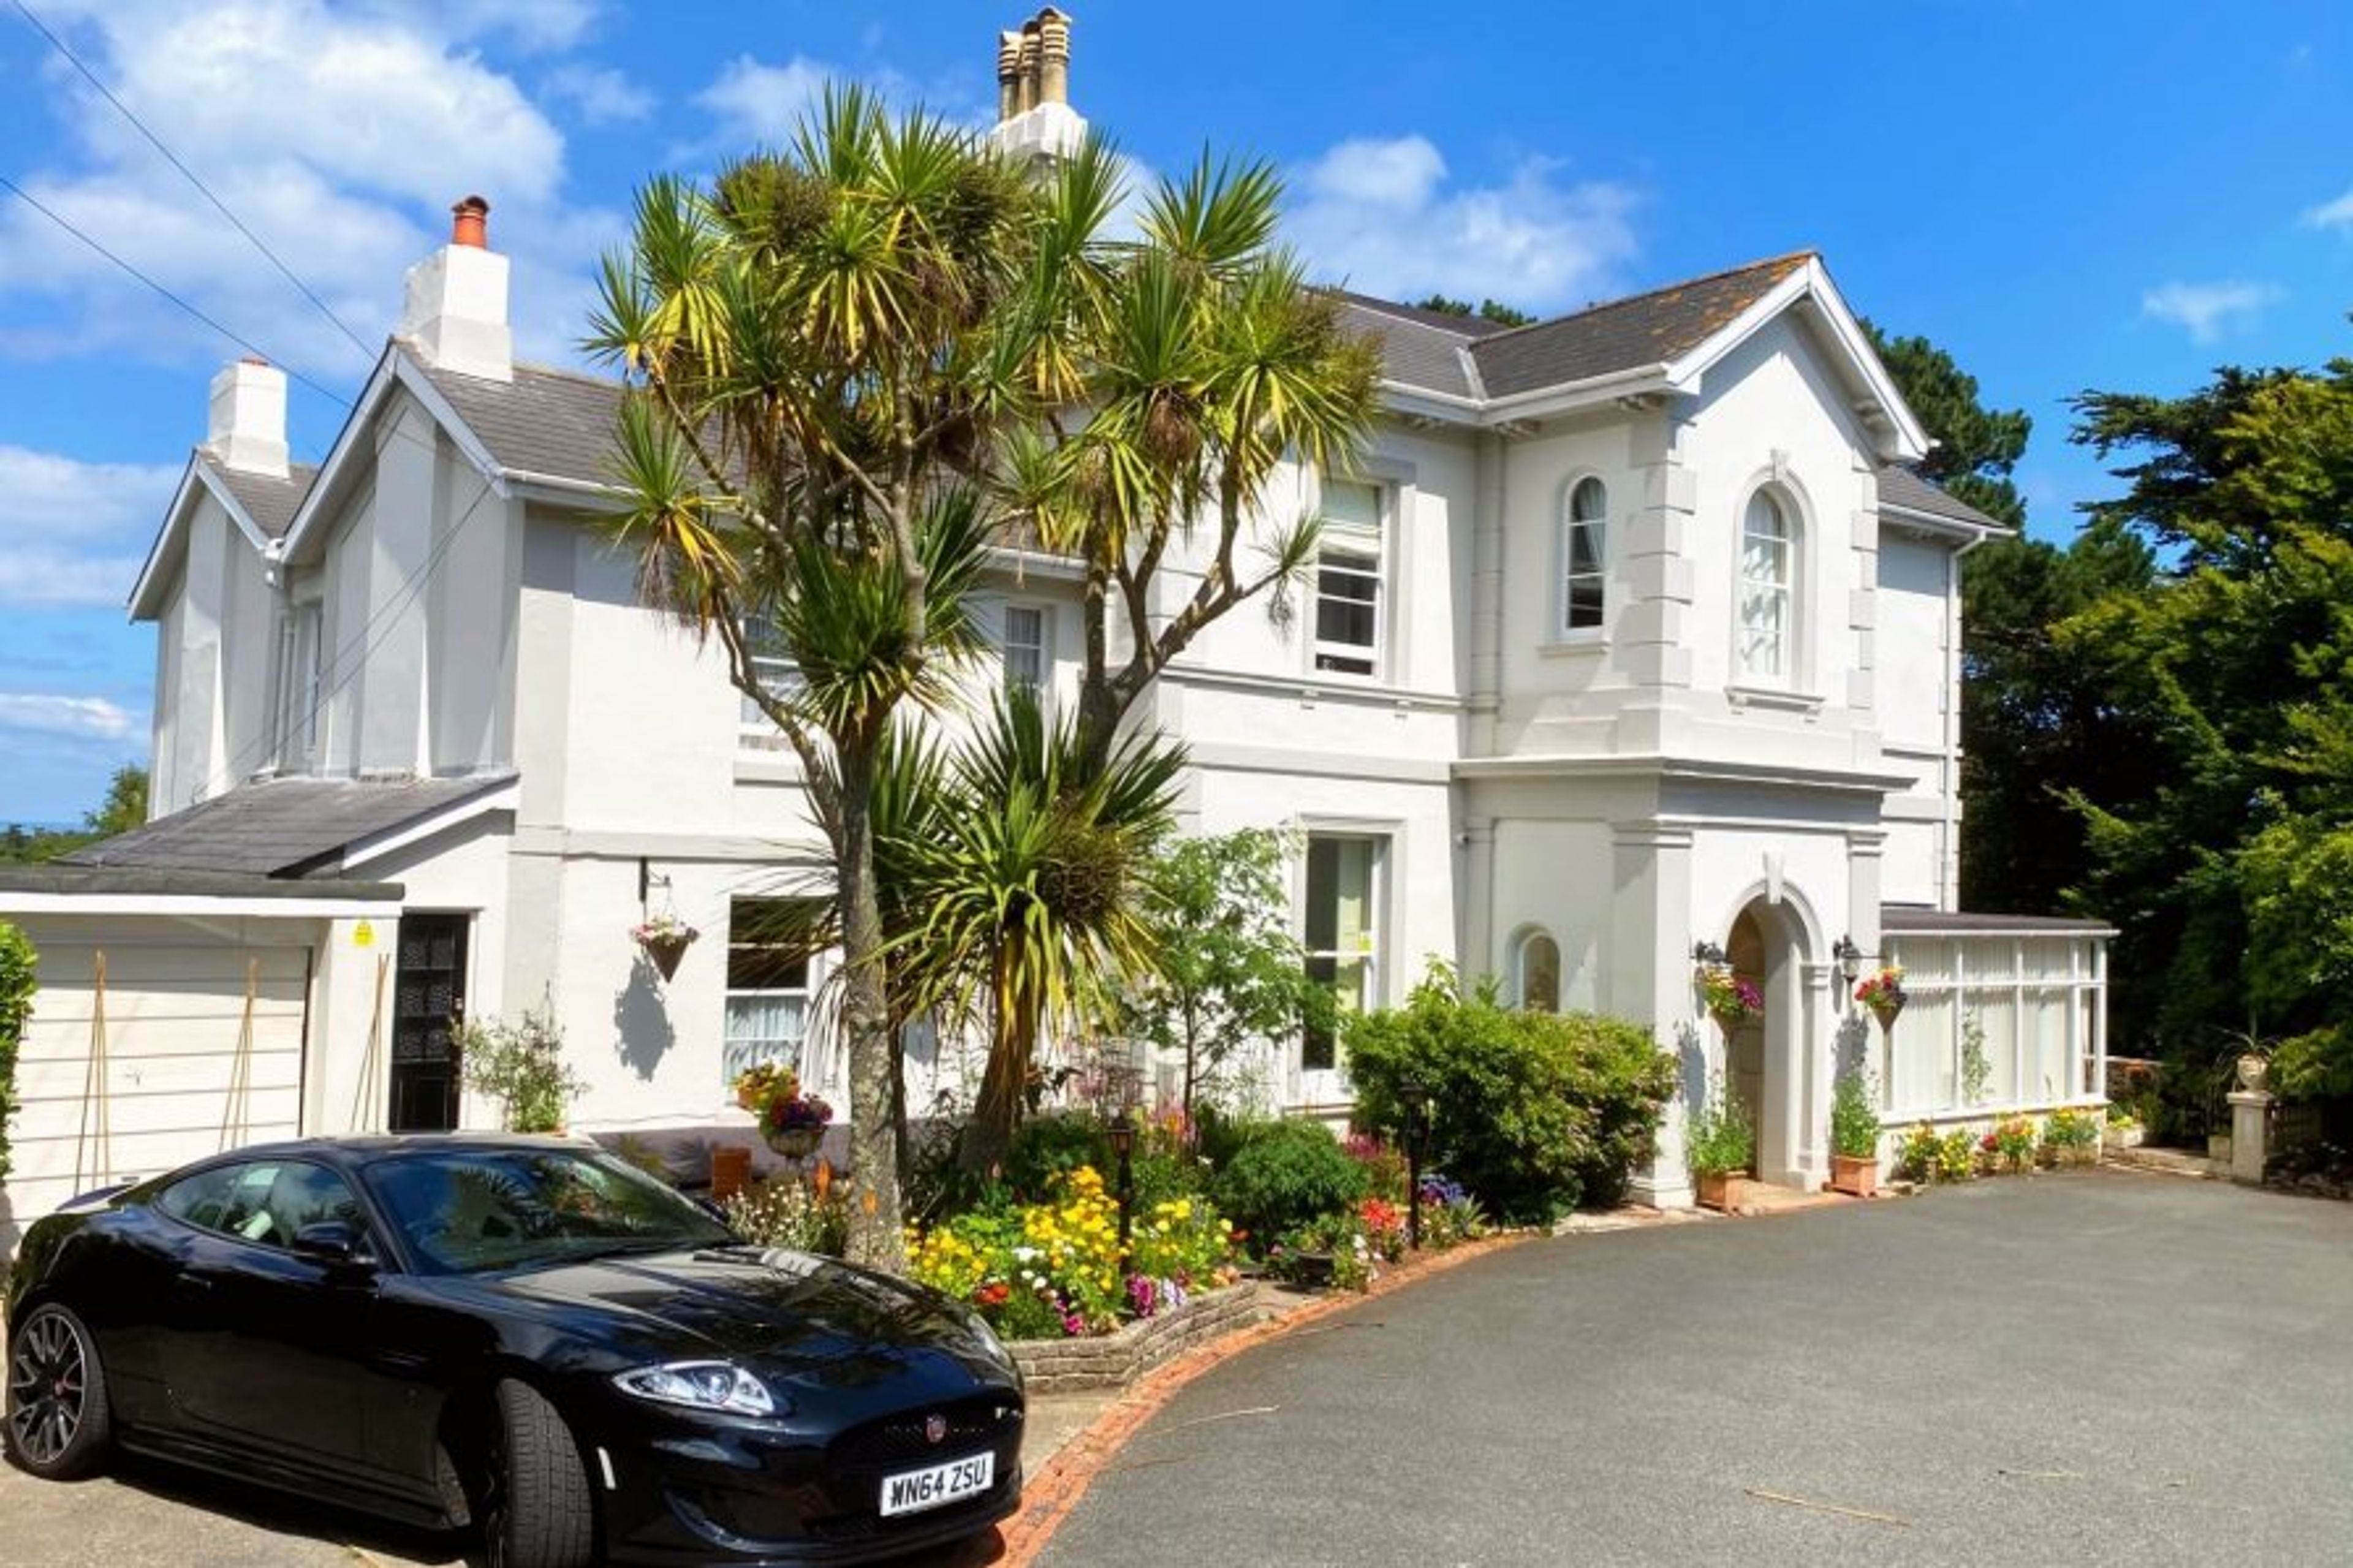 The Muntham Holiday Apartments in Torquay